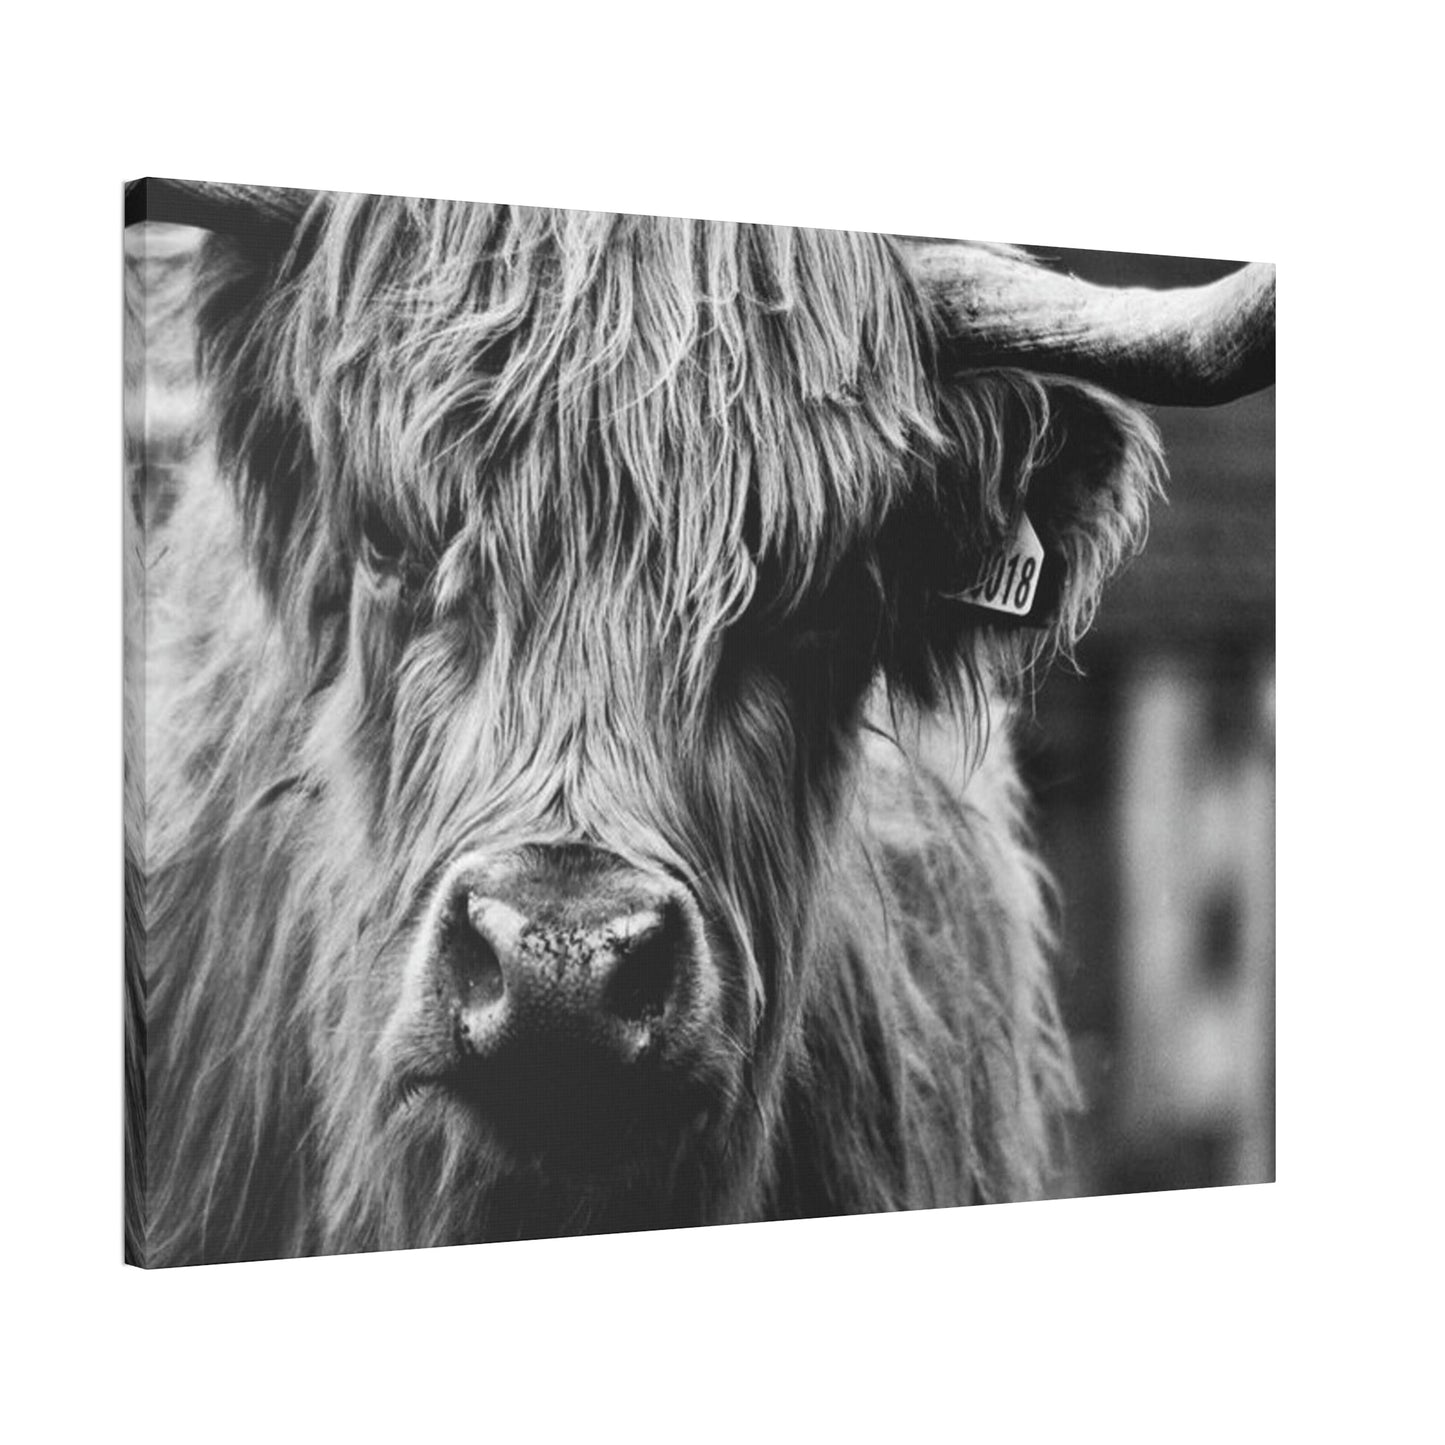 Rustic Highland Cow: Vintage Wall Art